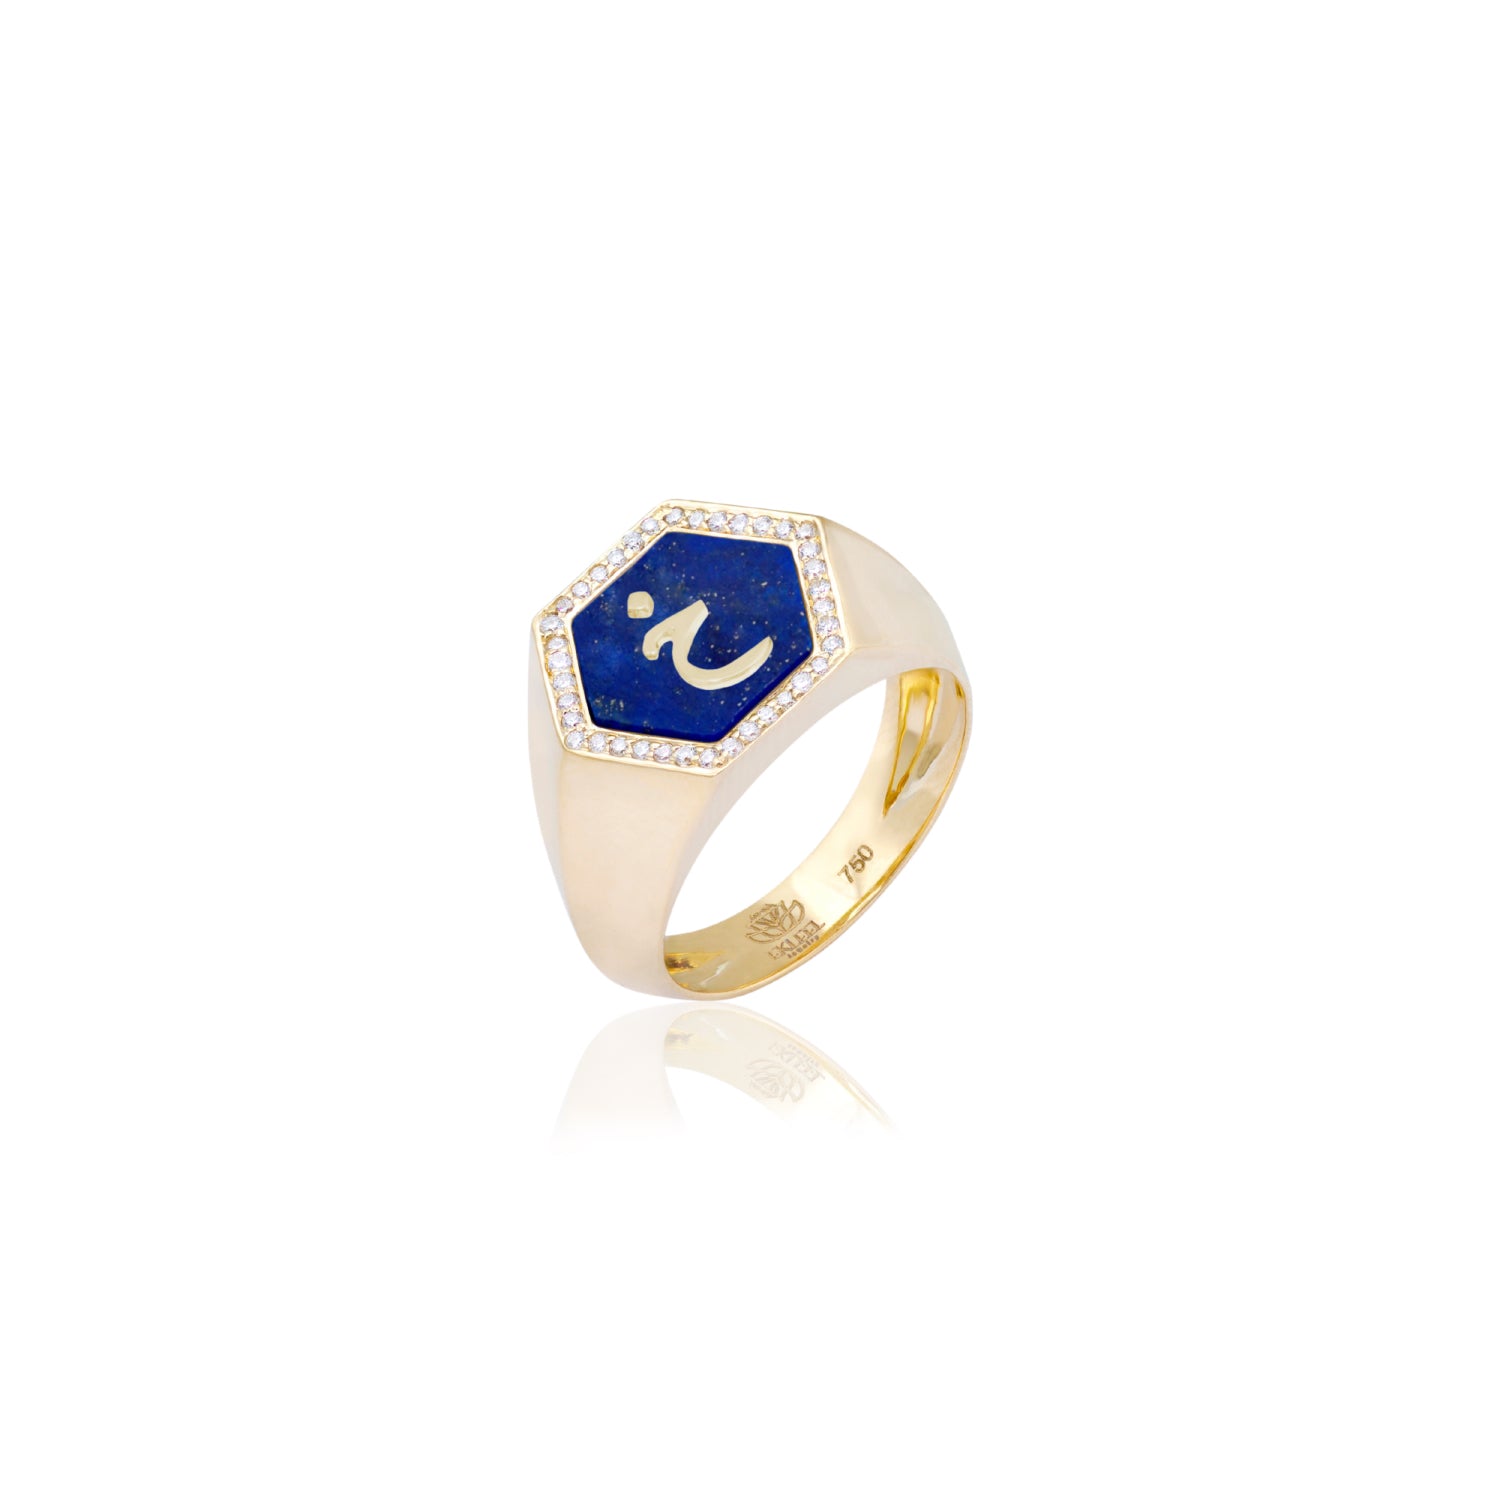 Qamoos 2.0 Letter خ Lapis Lazuli and Diamond Signet Ring in Yellow Gold